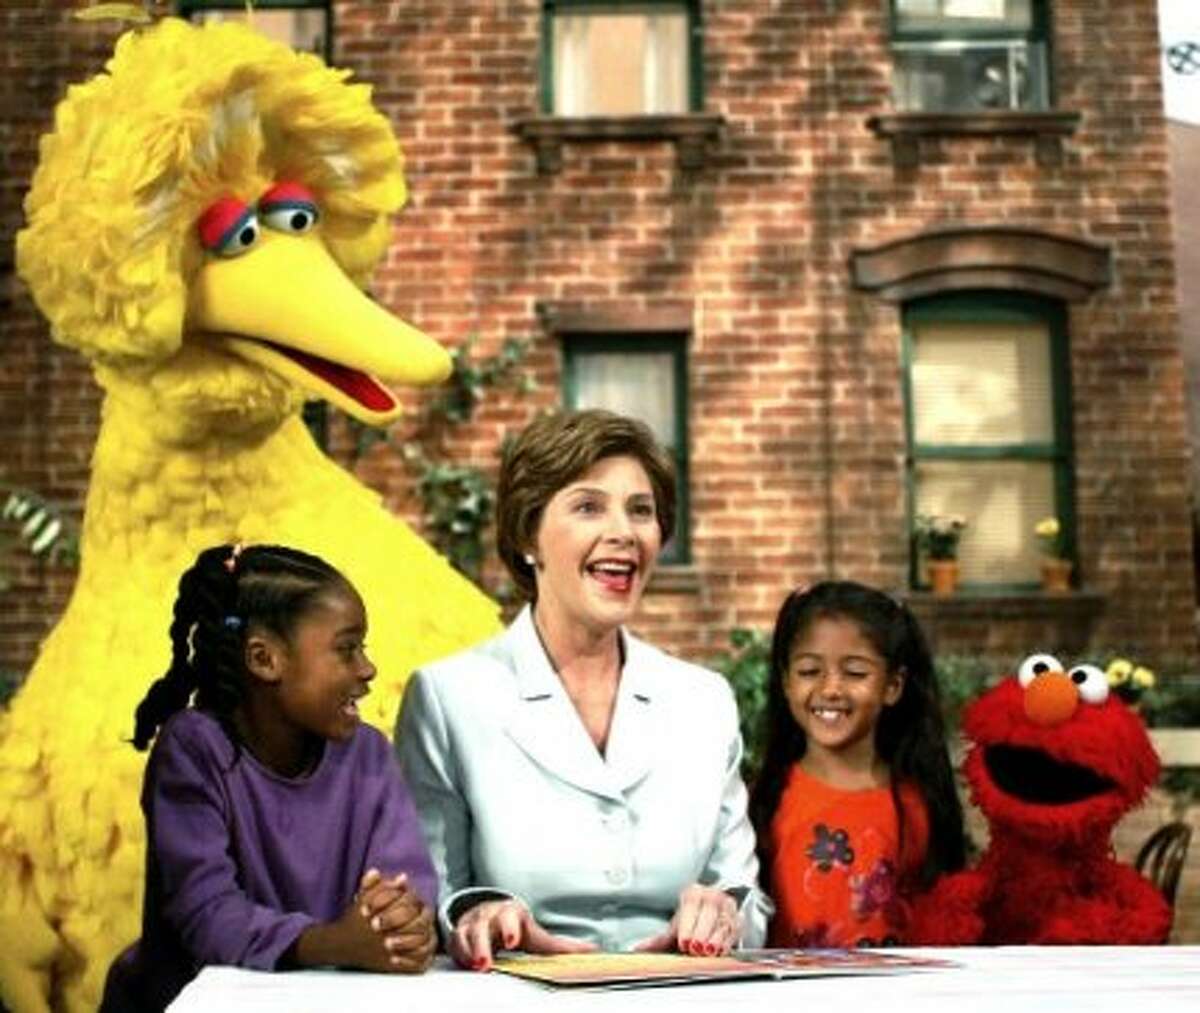 In 2002, Former First Lady Laura Bush, center, read a book to Sydney Martinez, Big Bird, Sienna Jerries and Elmo. (AP Photo)